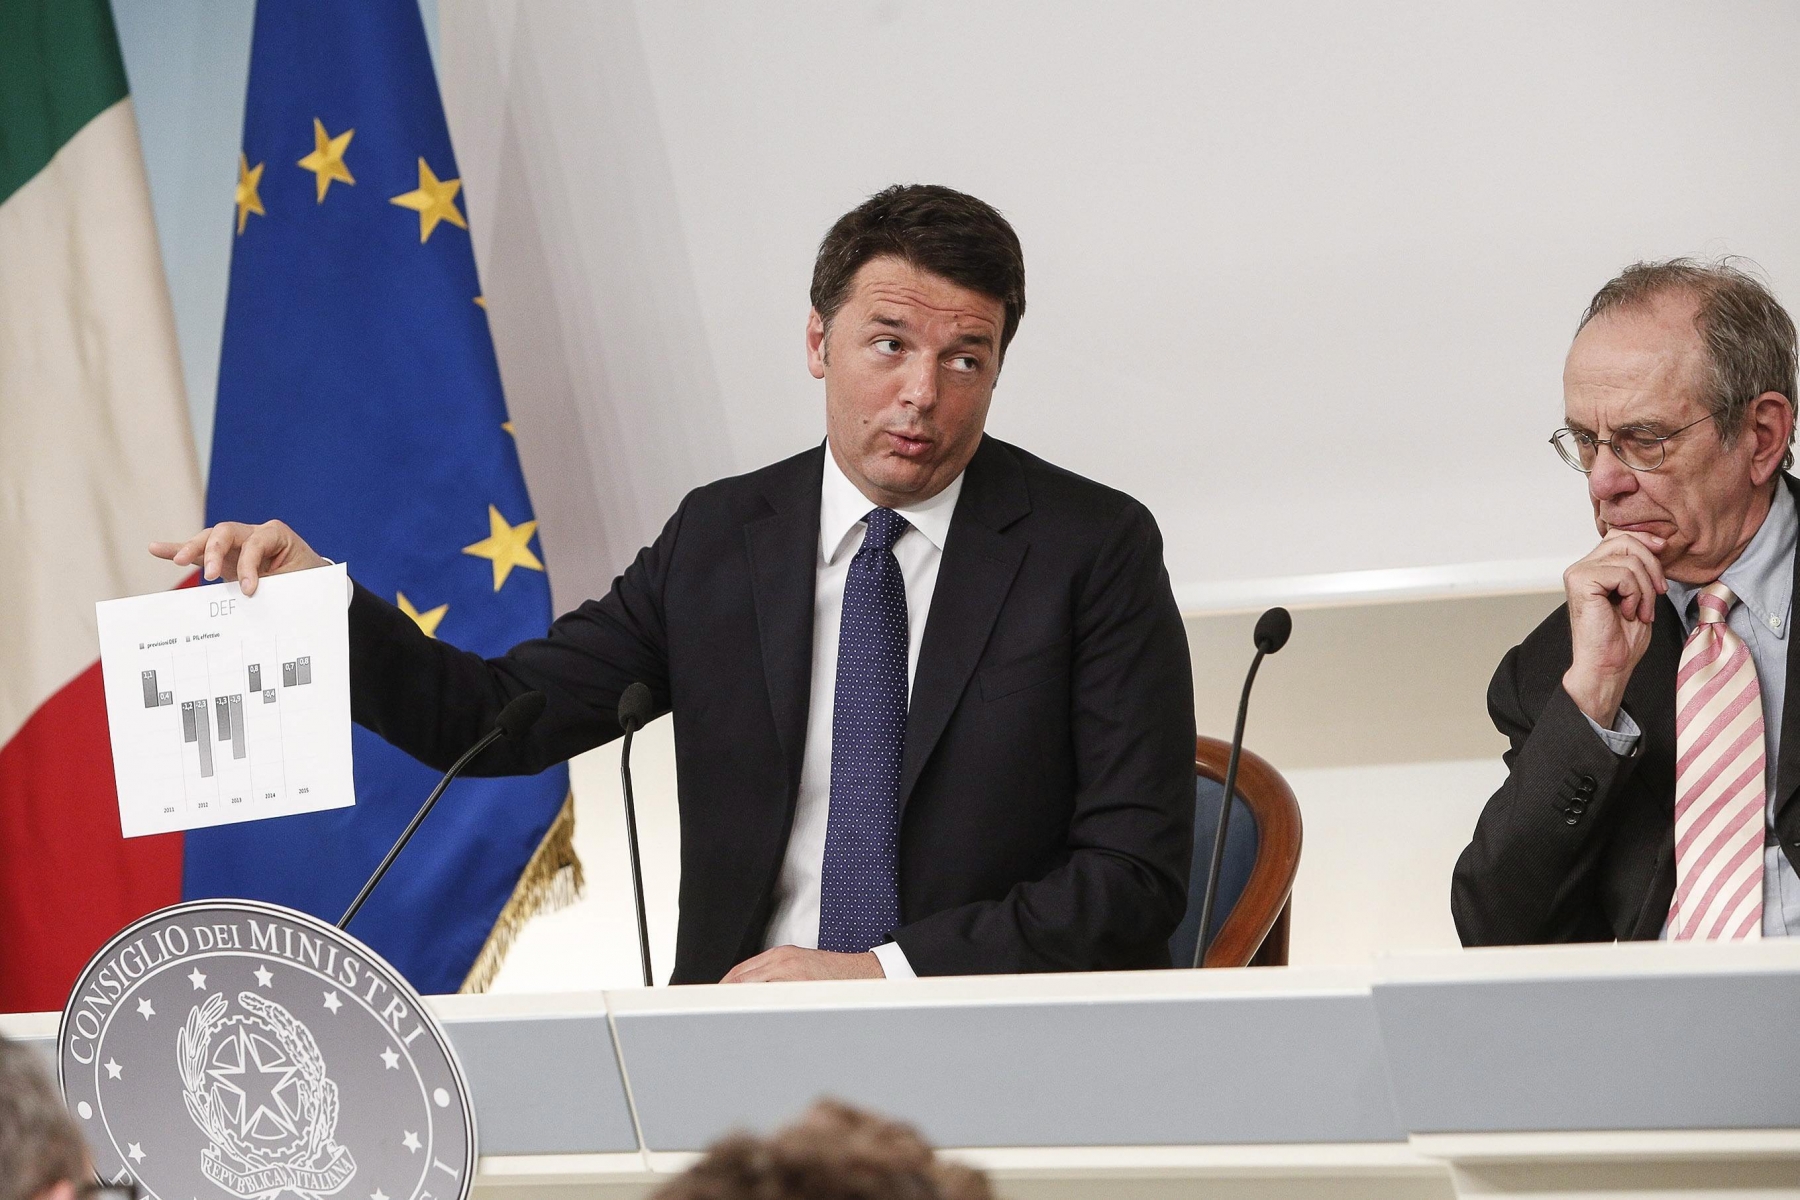 epa05250127 Italian Prime Minister Matteo Renzi and Italian economy Minister Pier Carlo Padoan (R) during the press conference in Chigi Palace after the approval of the government's financial and economic planning document (DEF), Rome, Italy, 08 April 2016. Renzi said Friday there will be no budget adjustments. 'We have yet to make a budget adjustment in 26 months of cohabitation' he said while presenting the DEF.  EPA/GIUSEPPE LAMI ITALY GOVERNMENT BUDGET